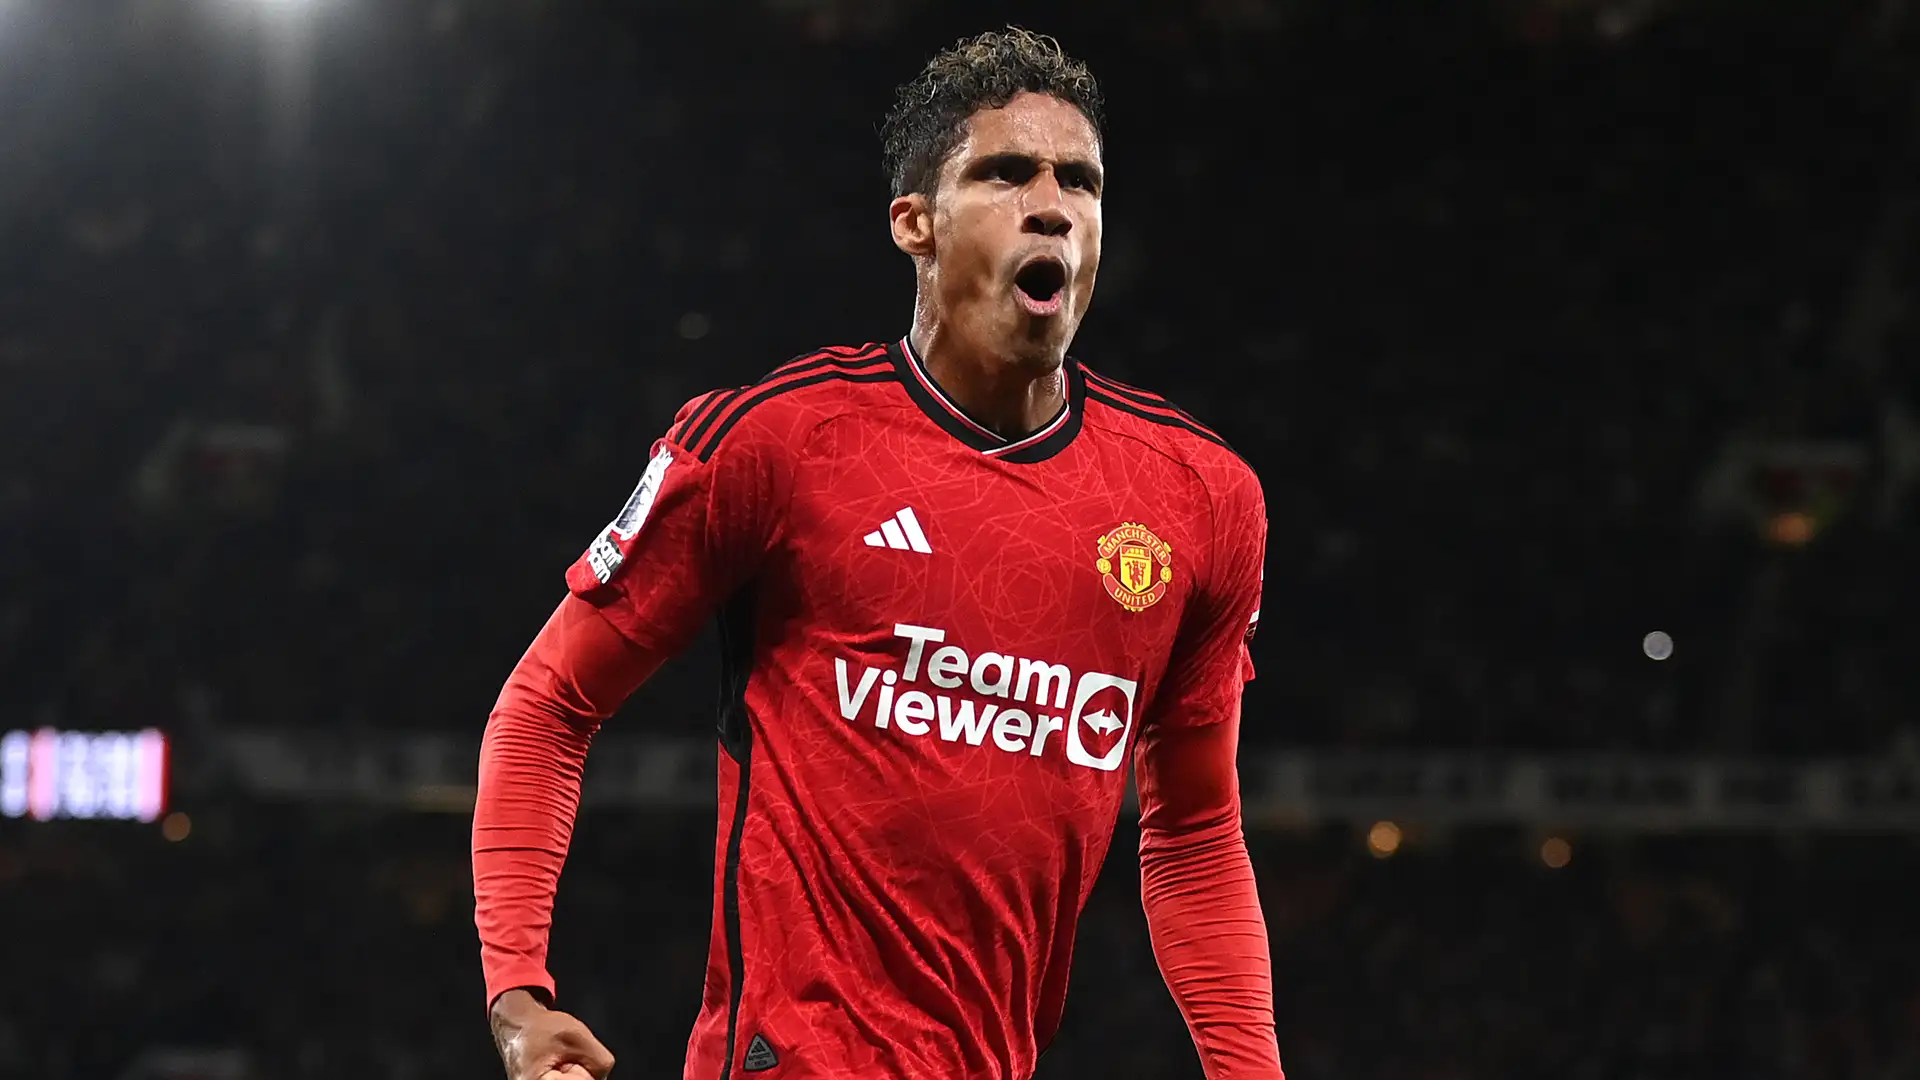 Raphael Varane linked with shock move to Liga MX side Tigres after announcing Man Utd exit